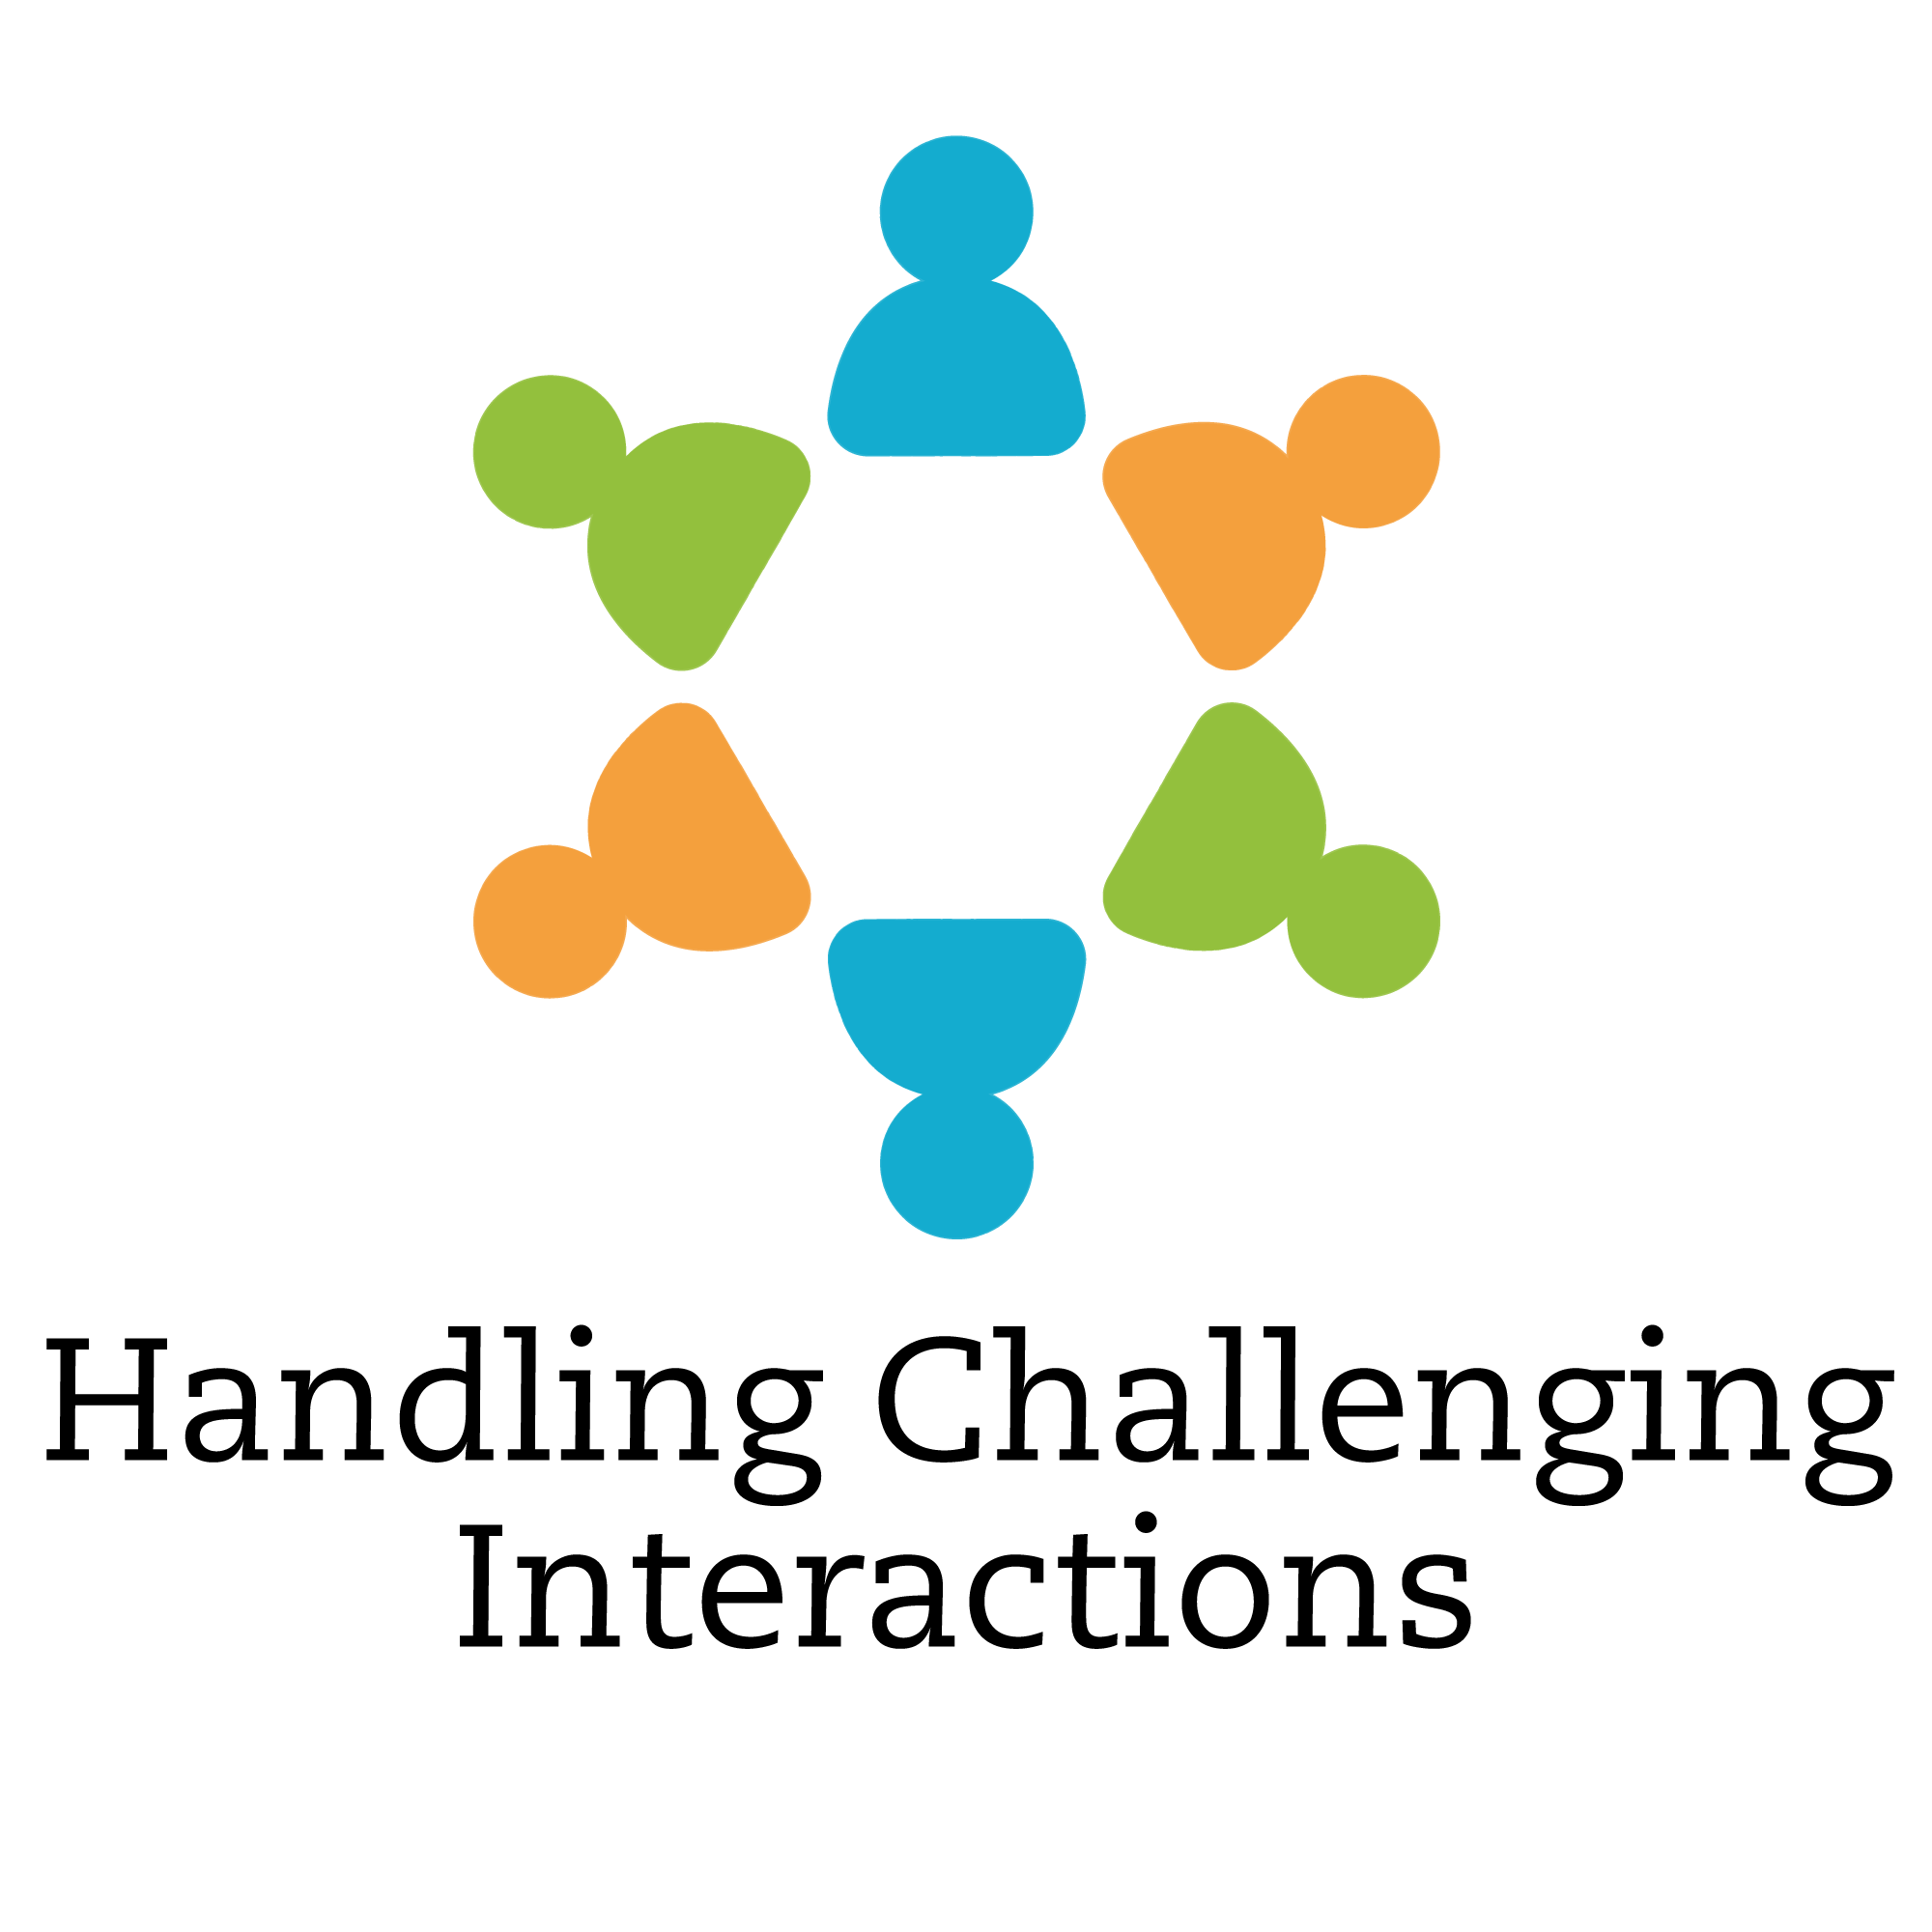 Handling challenging interactions with confidence (22 June)